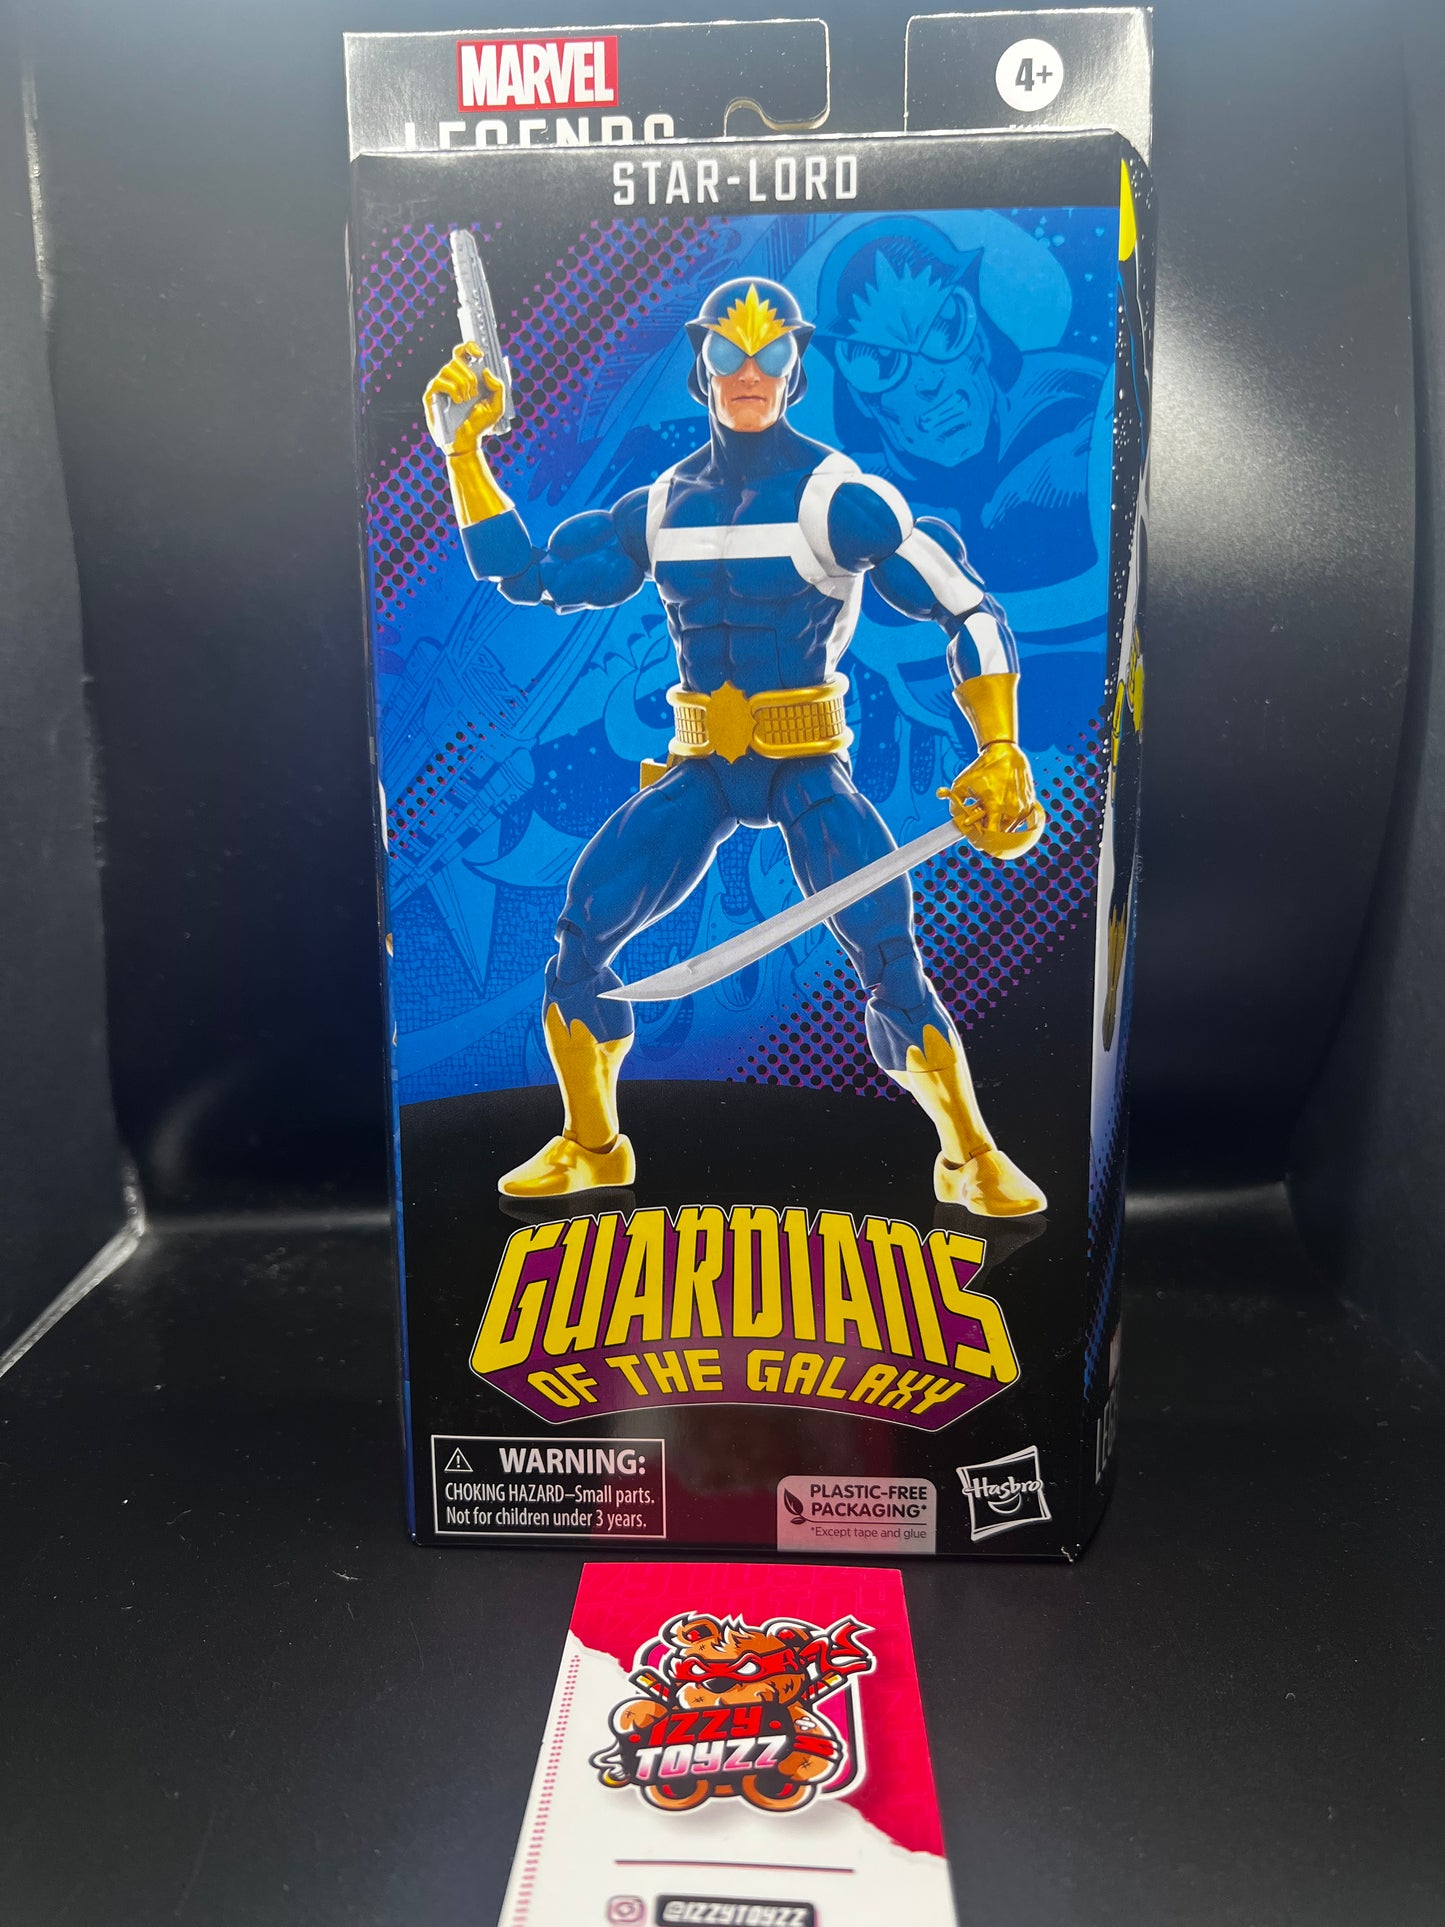 Marvel: Legends Star-Lord Guardians of the Galaxy Toy Action Figure